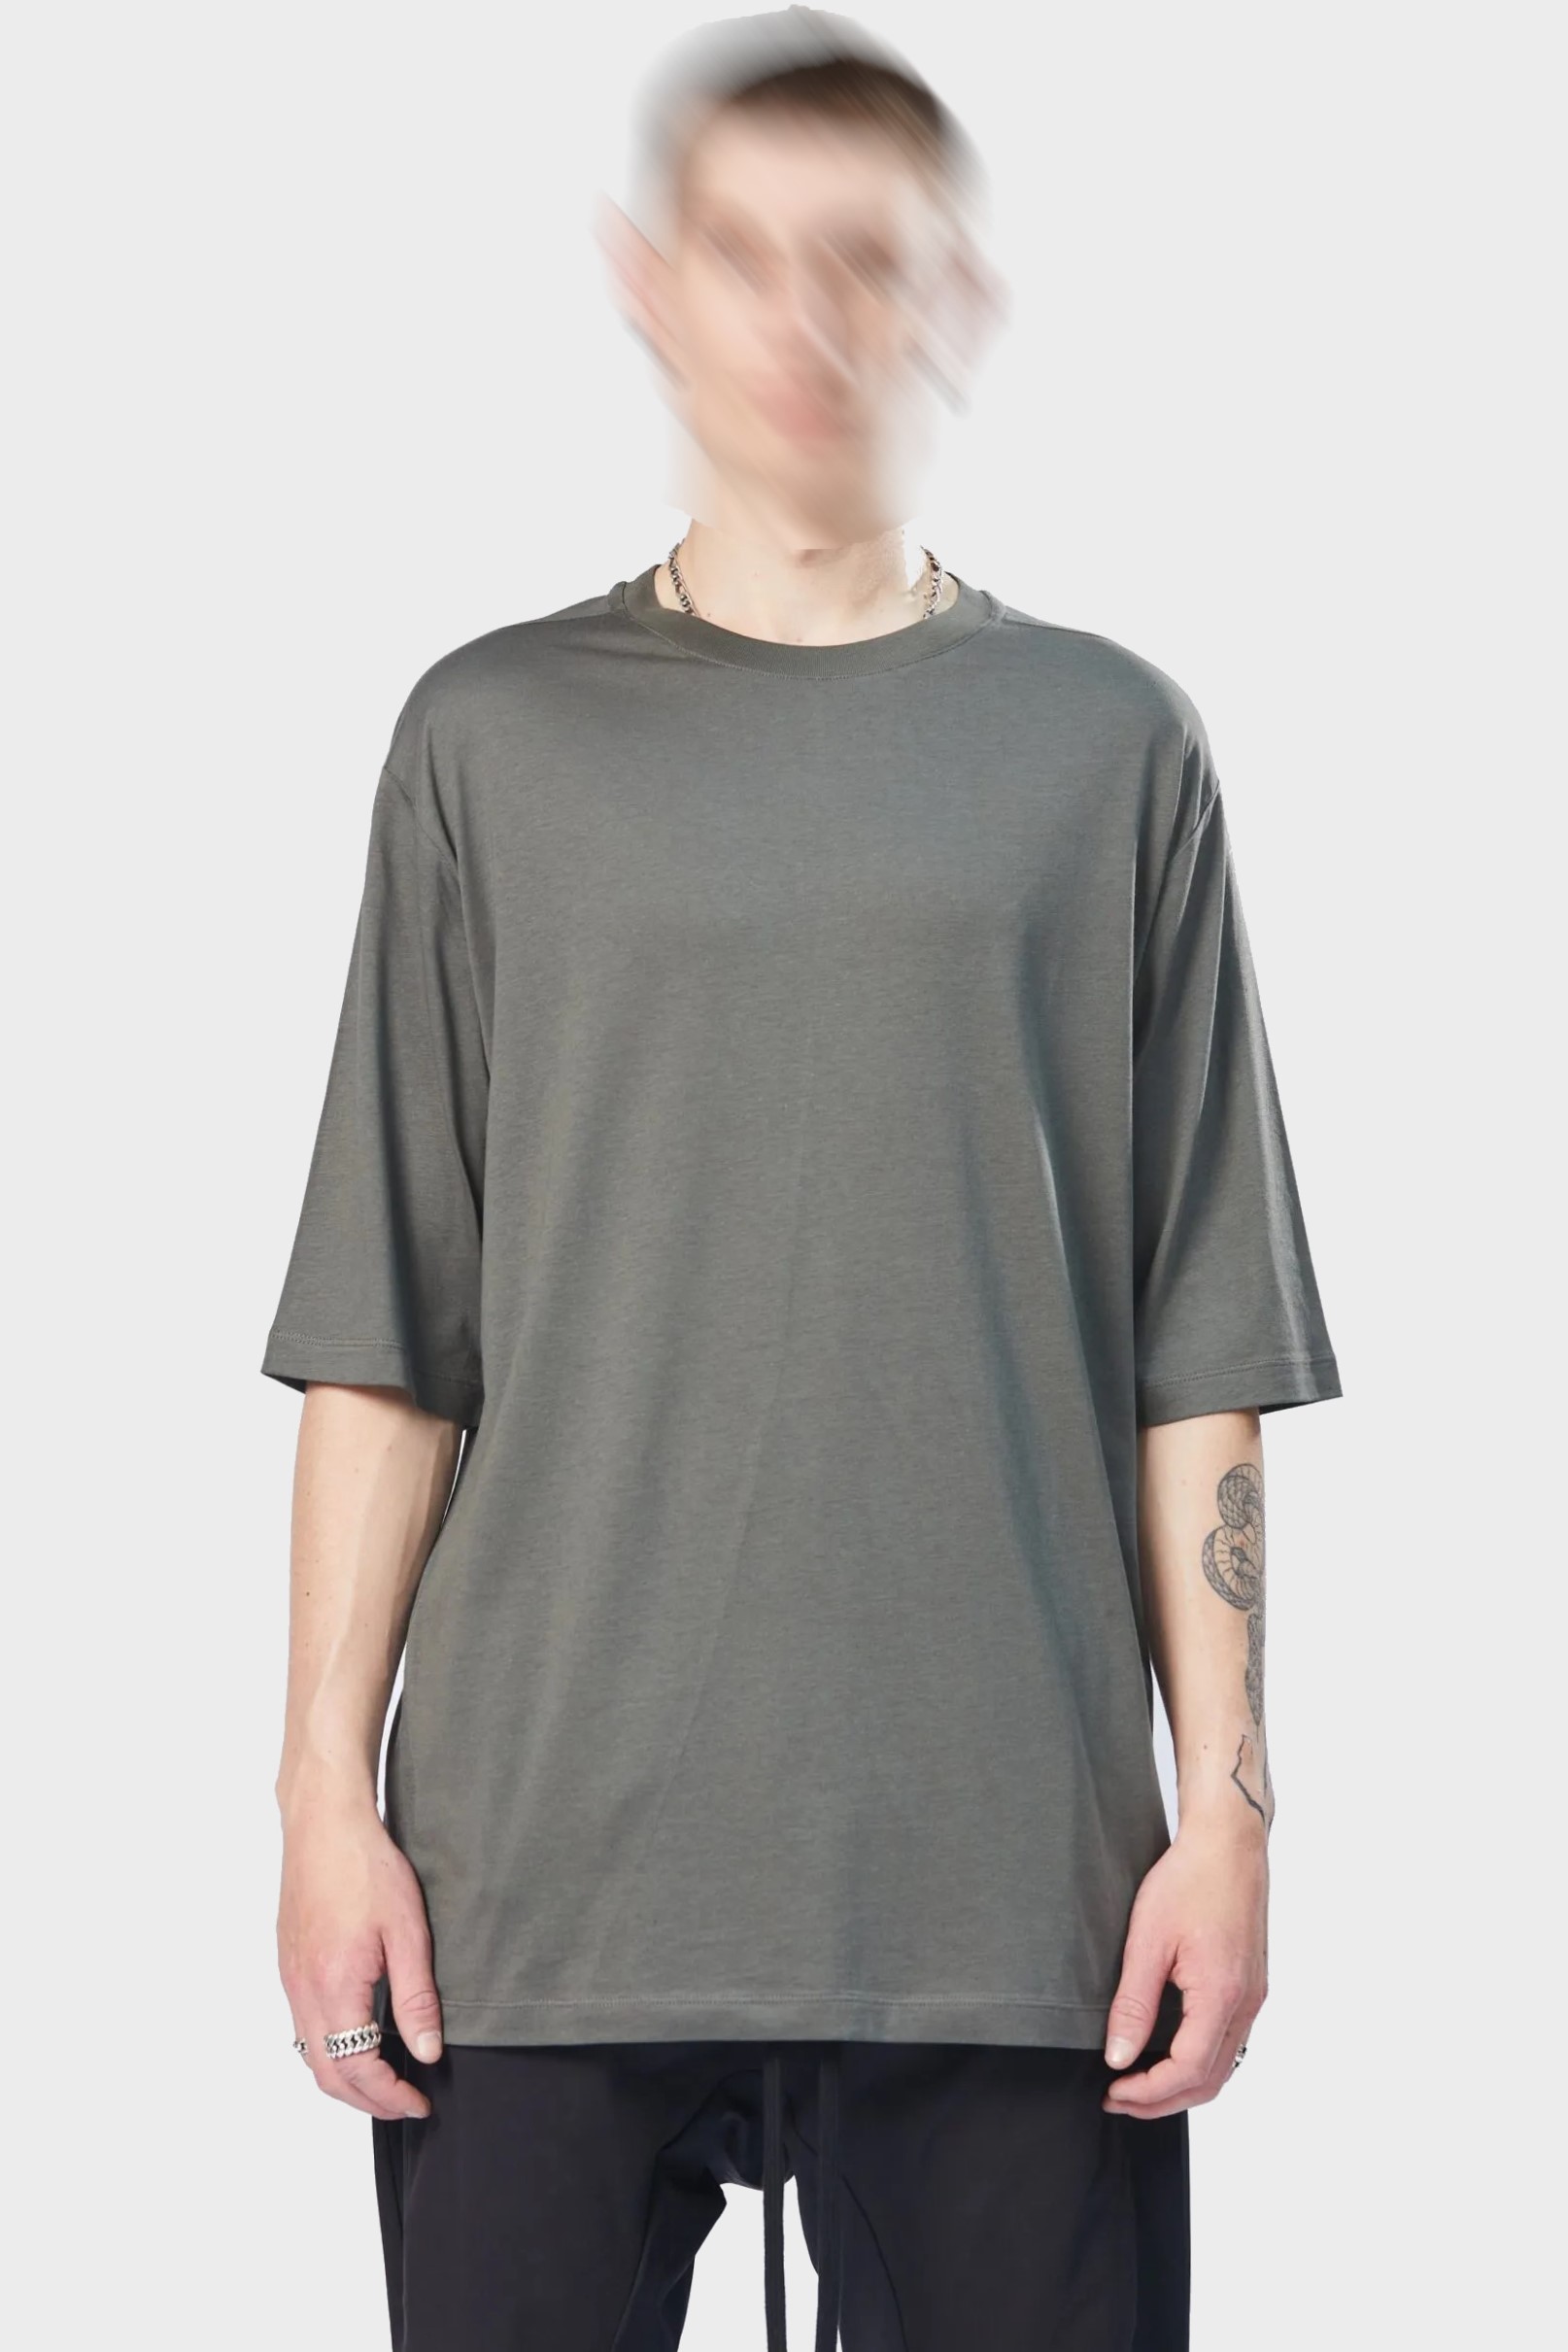 THOM KROM Oversize T-Shirt in Ivy Green M